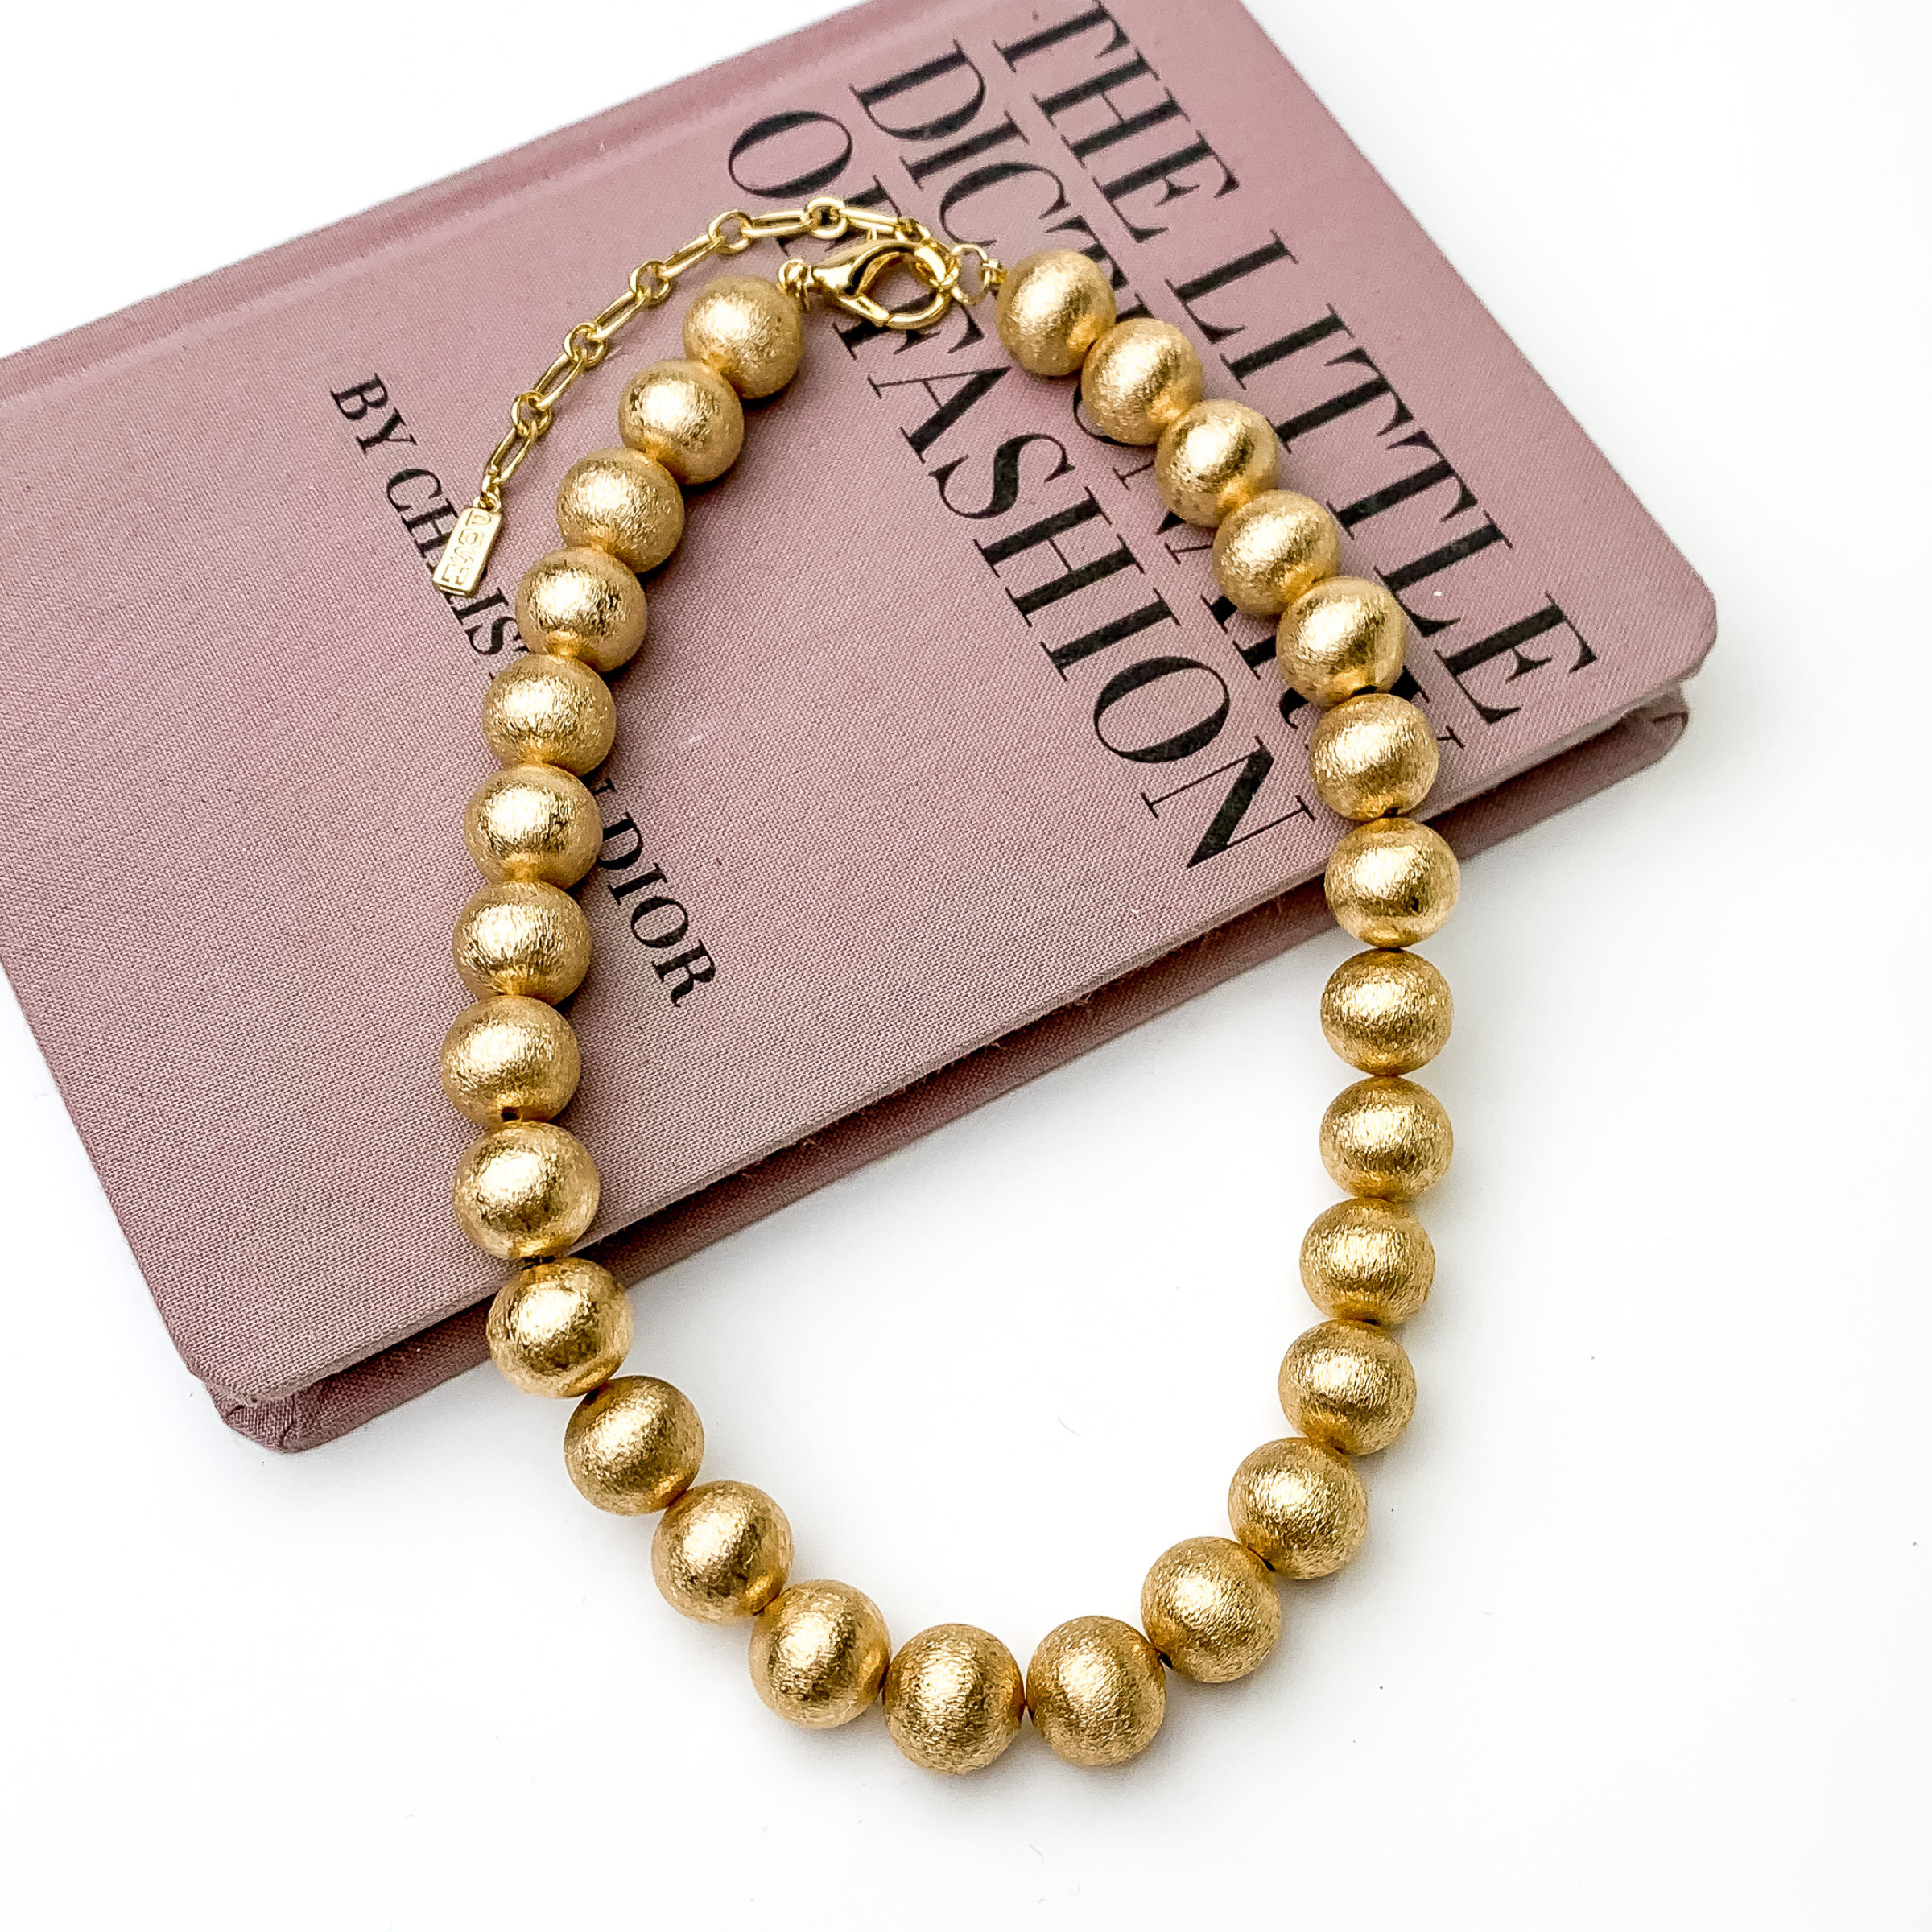 Gold beaded necklace pictured laying partially on a mauve book on a white background. 